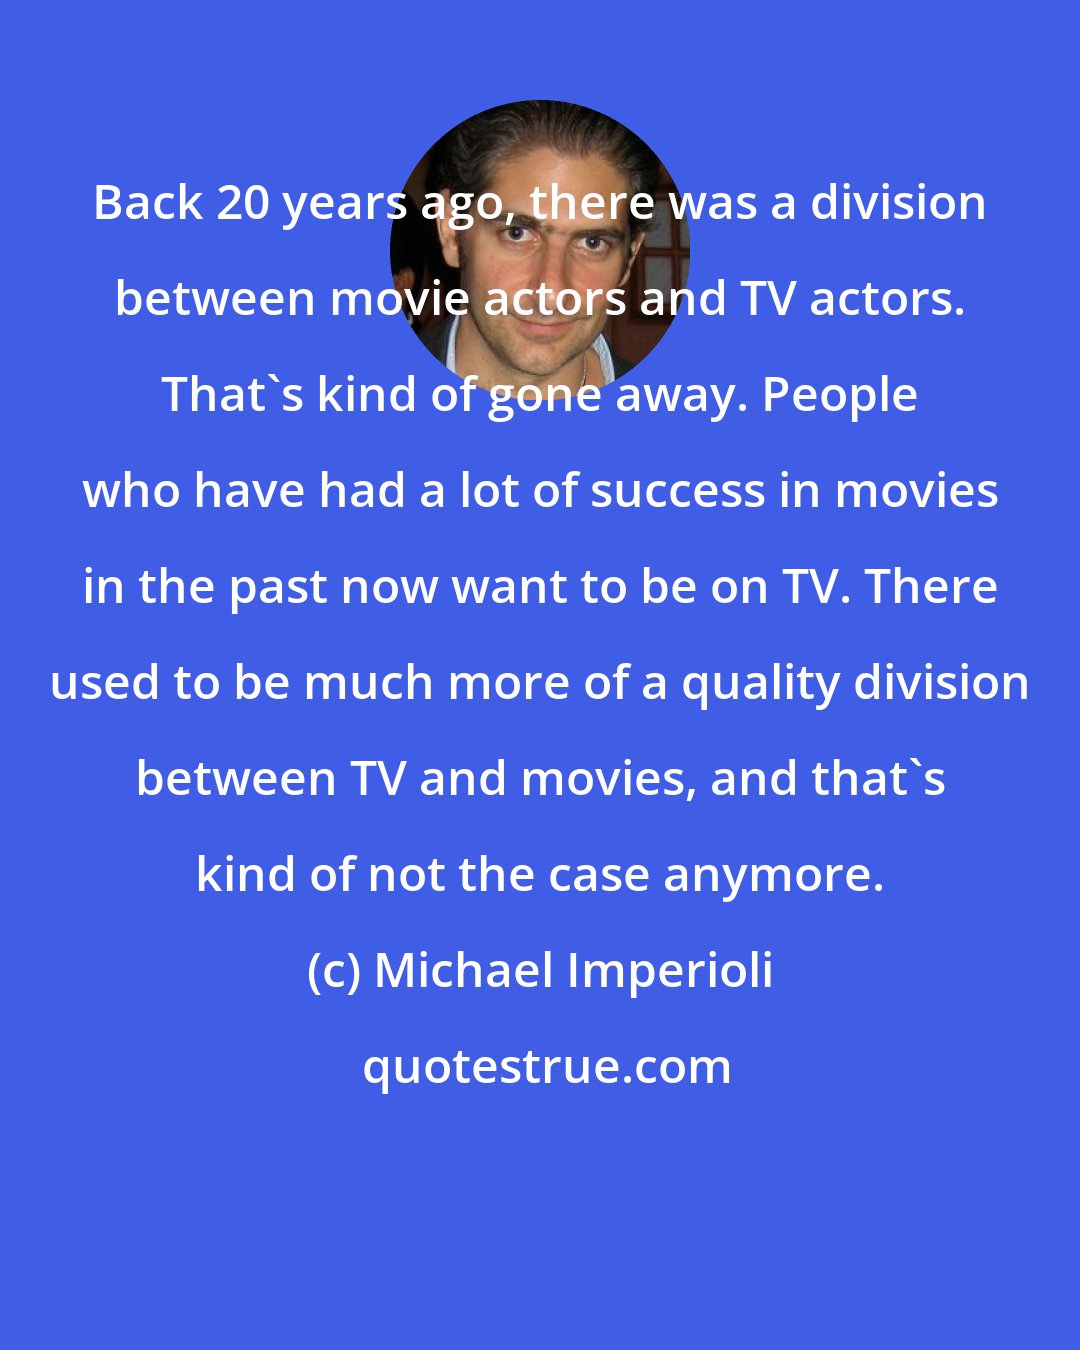 Michael Imperioli: Back 20 years ago, there was a division between movie actors and TV actors. That's kind of gone away. People who have had a lot of success in movies in the past now want to be on TV. There used to be much more of a quality division between TV and movies, and that's kind of not the case anymore.